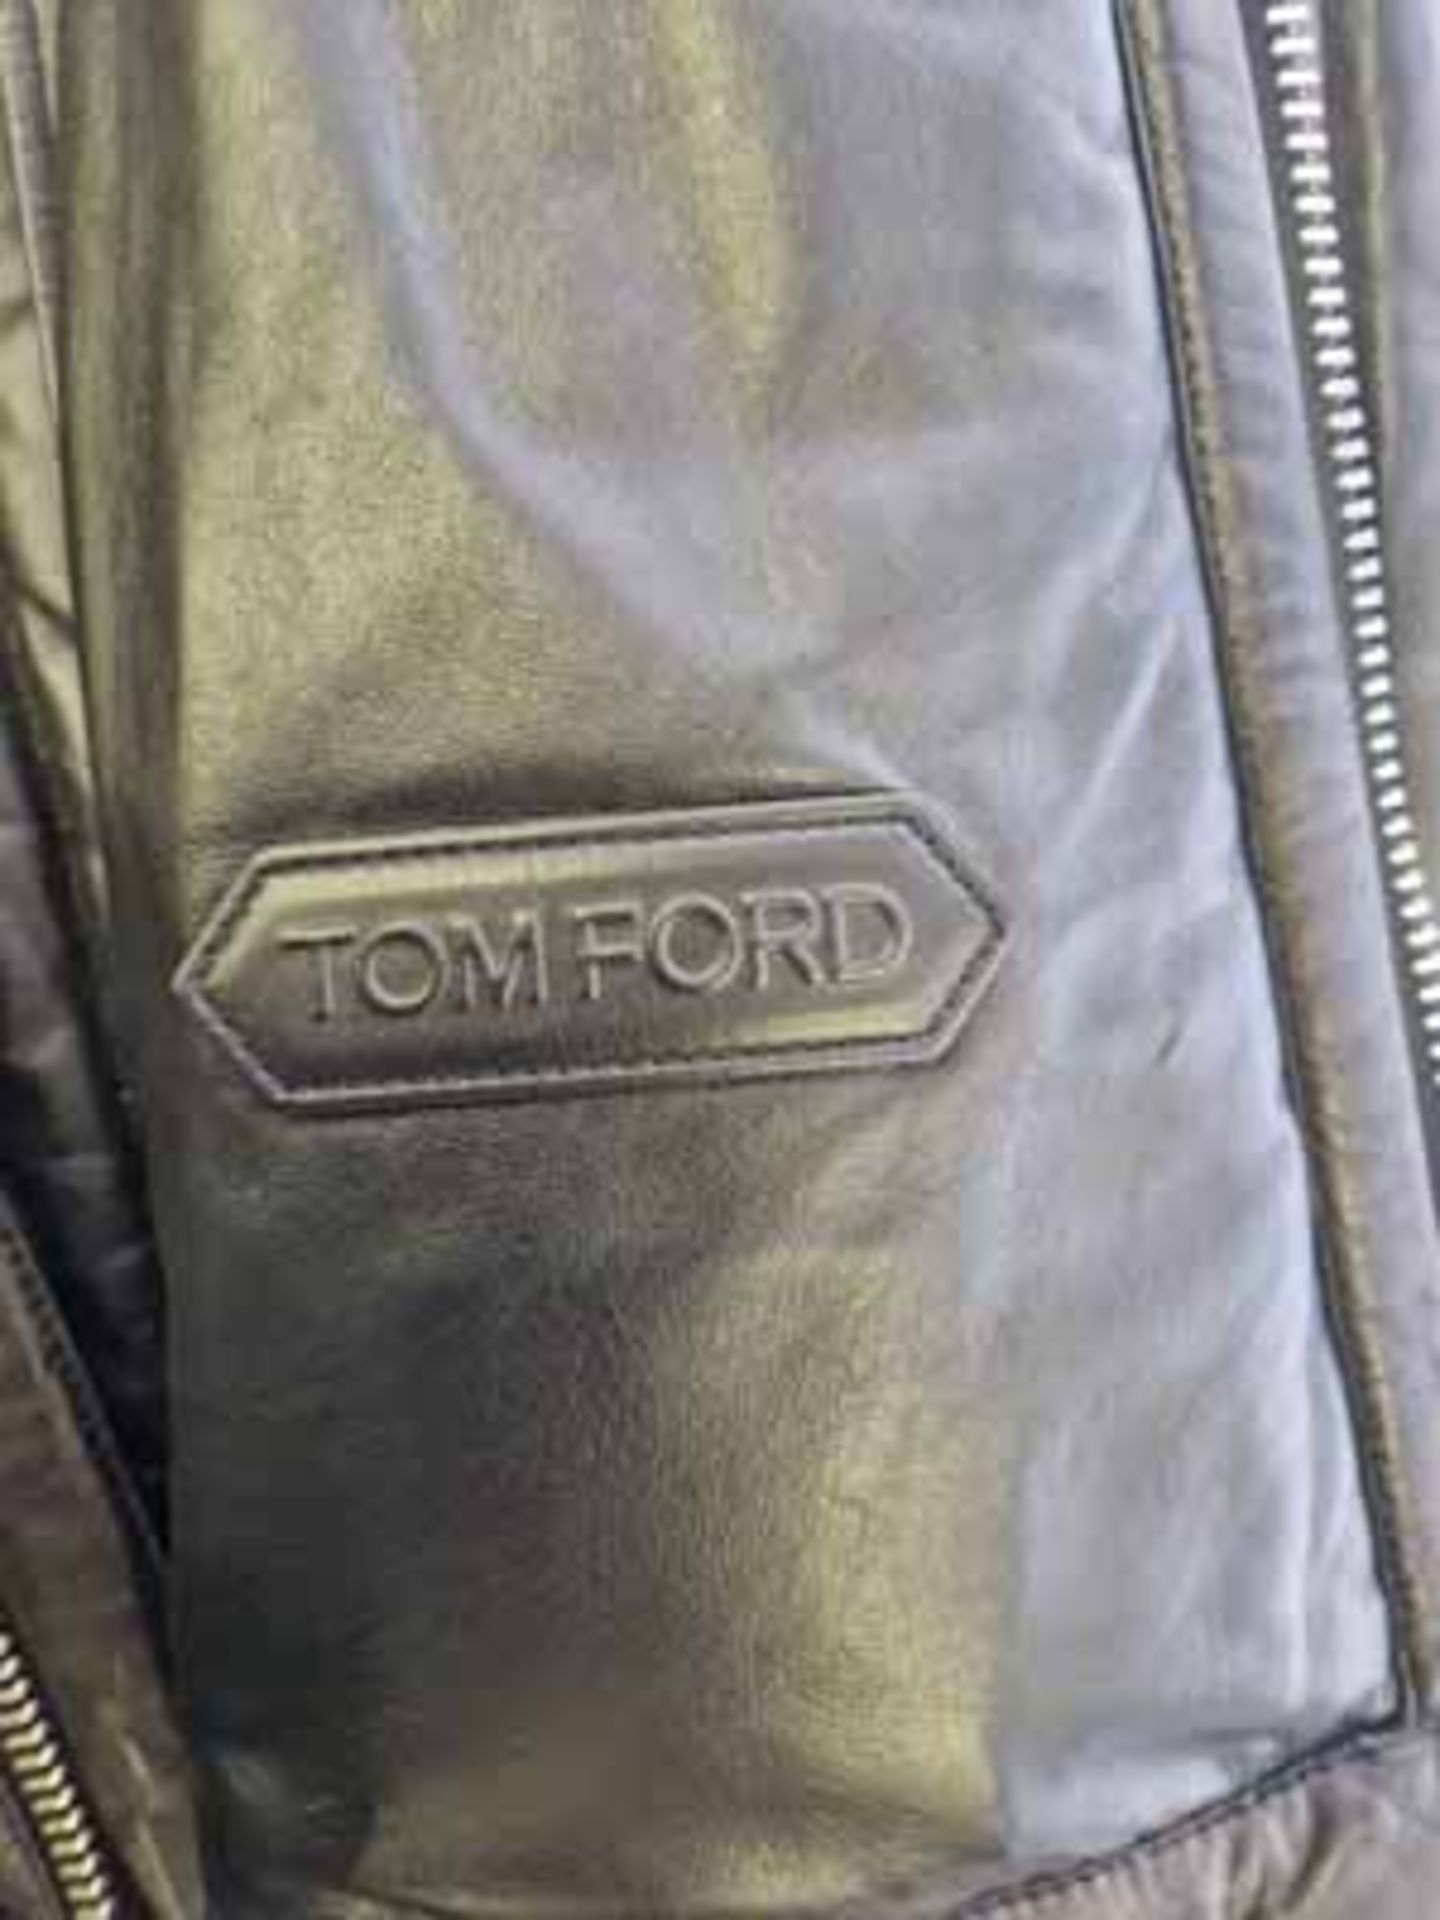 A TOM FORD Ovatta Padded Black Lamb's Leather Jacket with Ovatta Padding in Vertical Channels with - Image 2 of 3